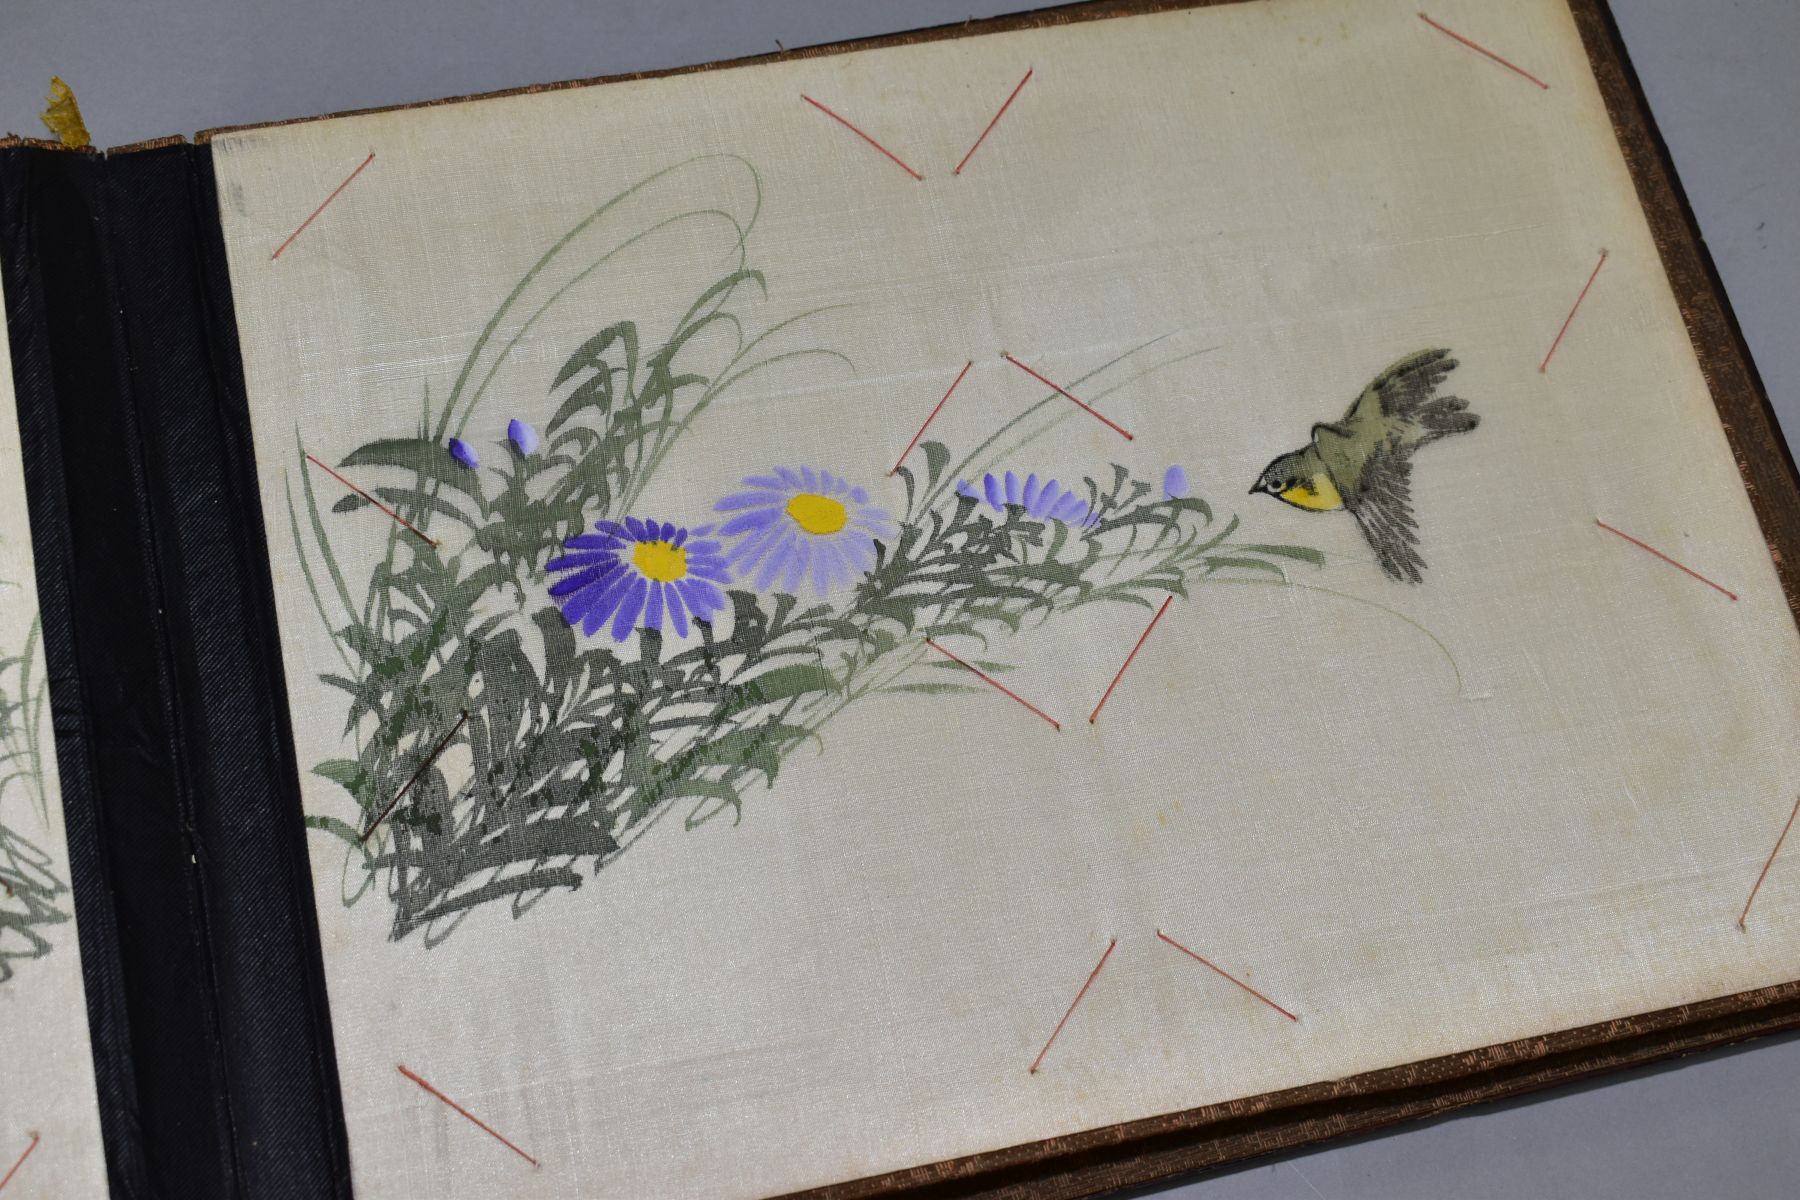 A SHIBYAMA LAQUERED PHOTOGRAPH/POSTCARD ALBUM, containing 20 leaves of painted silk illustrations, - Image 7 of 8